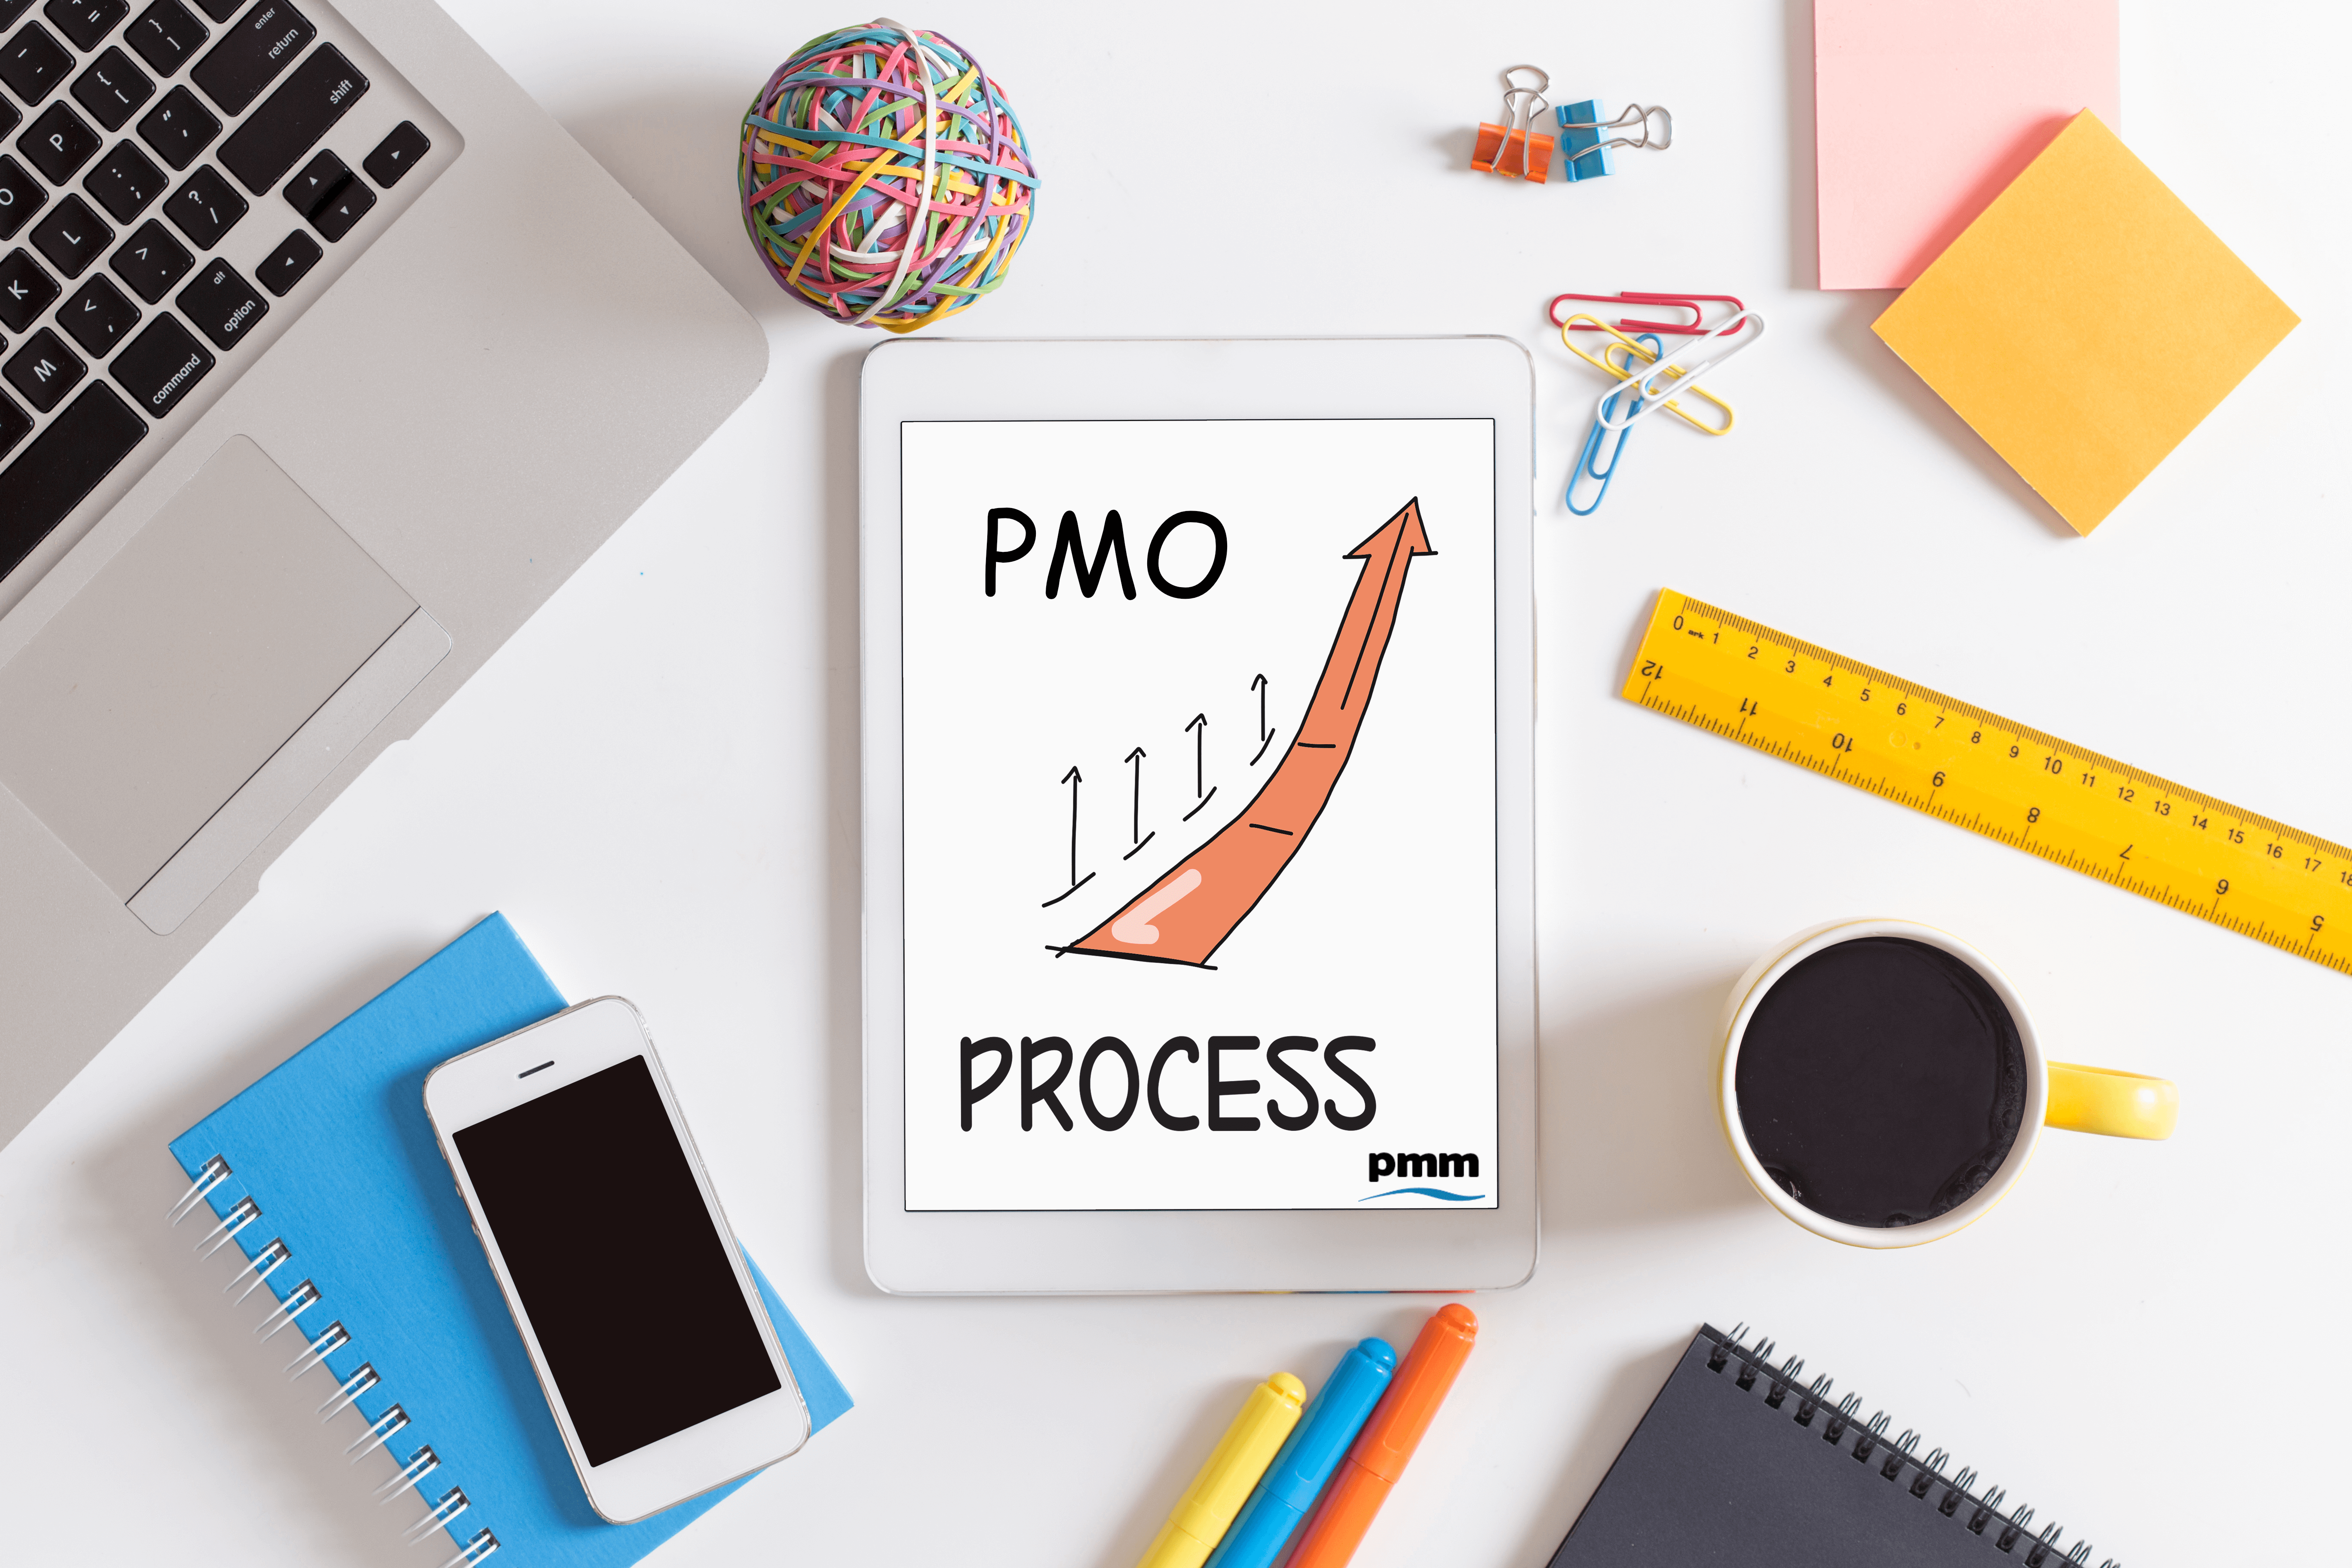 Are your PMO processes embedded and BAU?